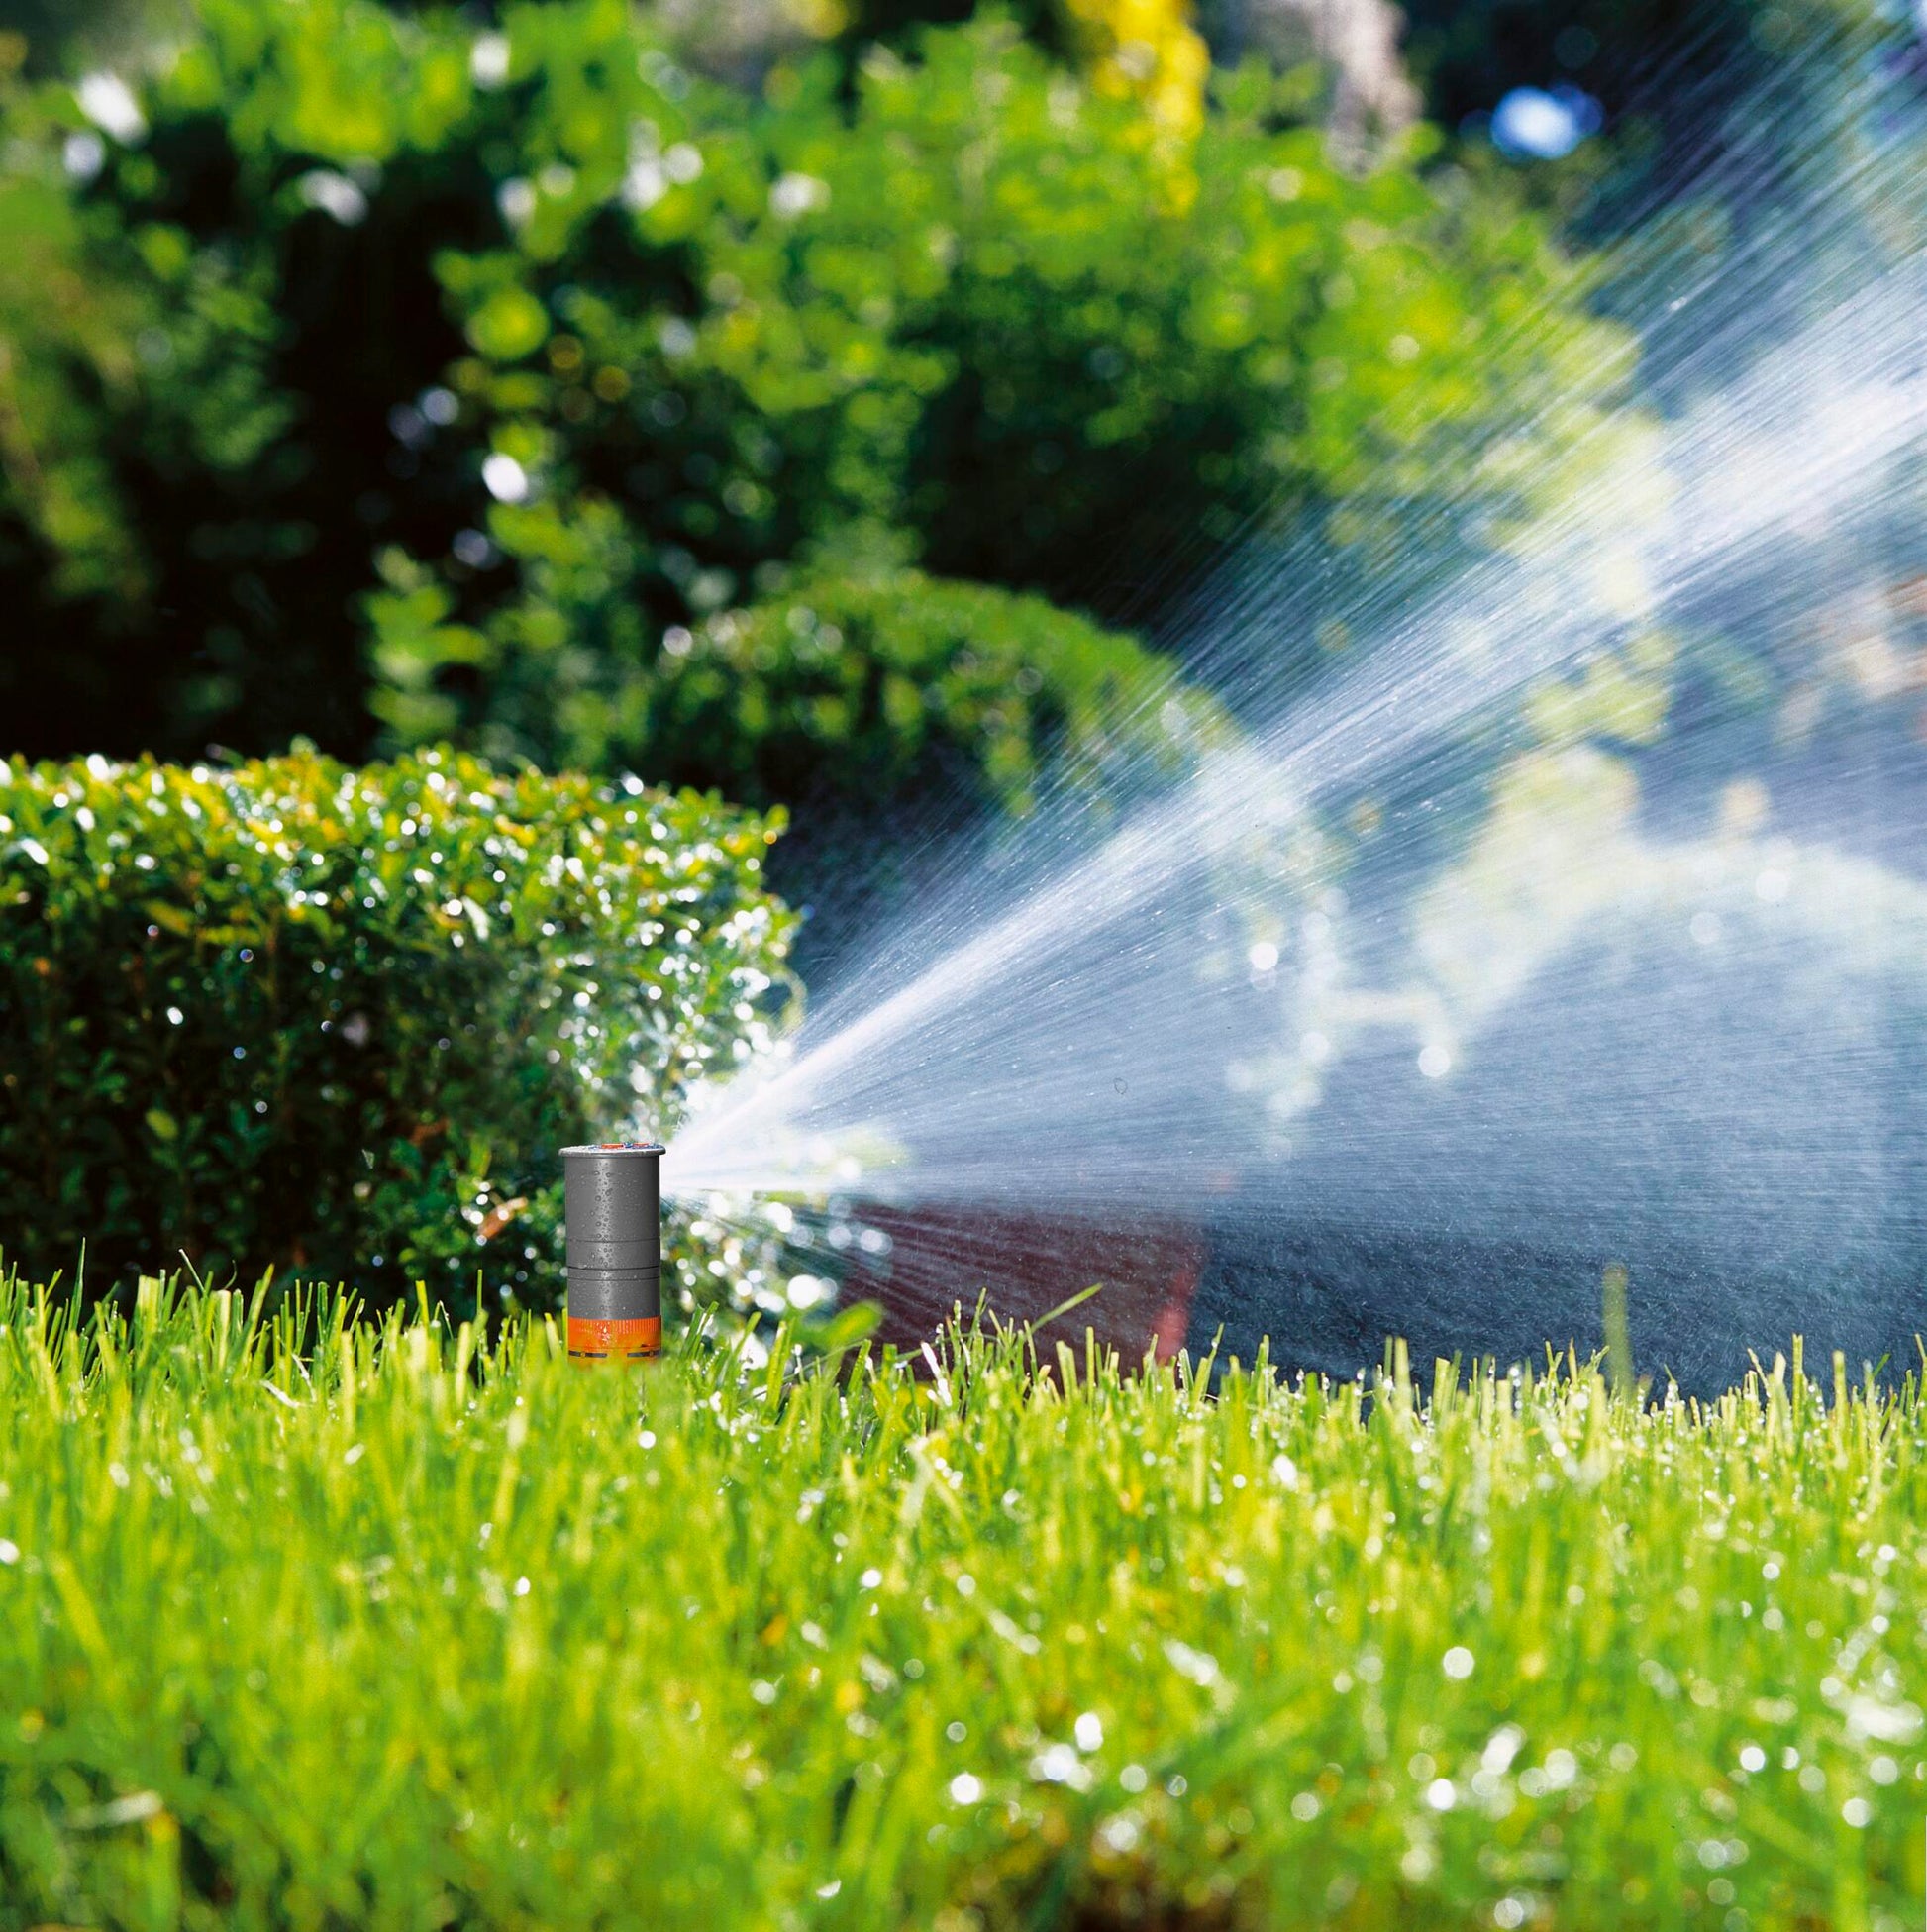 How to Repair Your Lawn Sprinkler